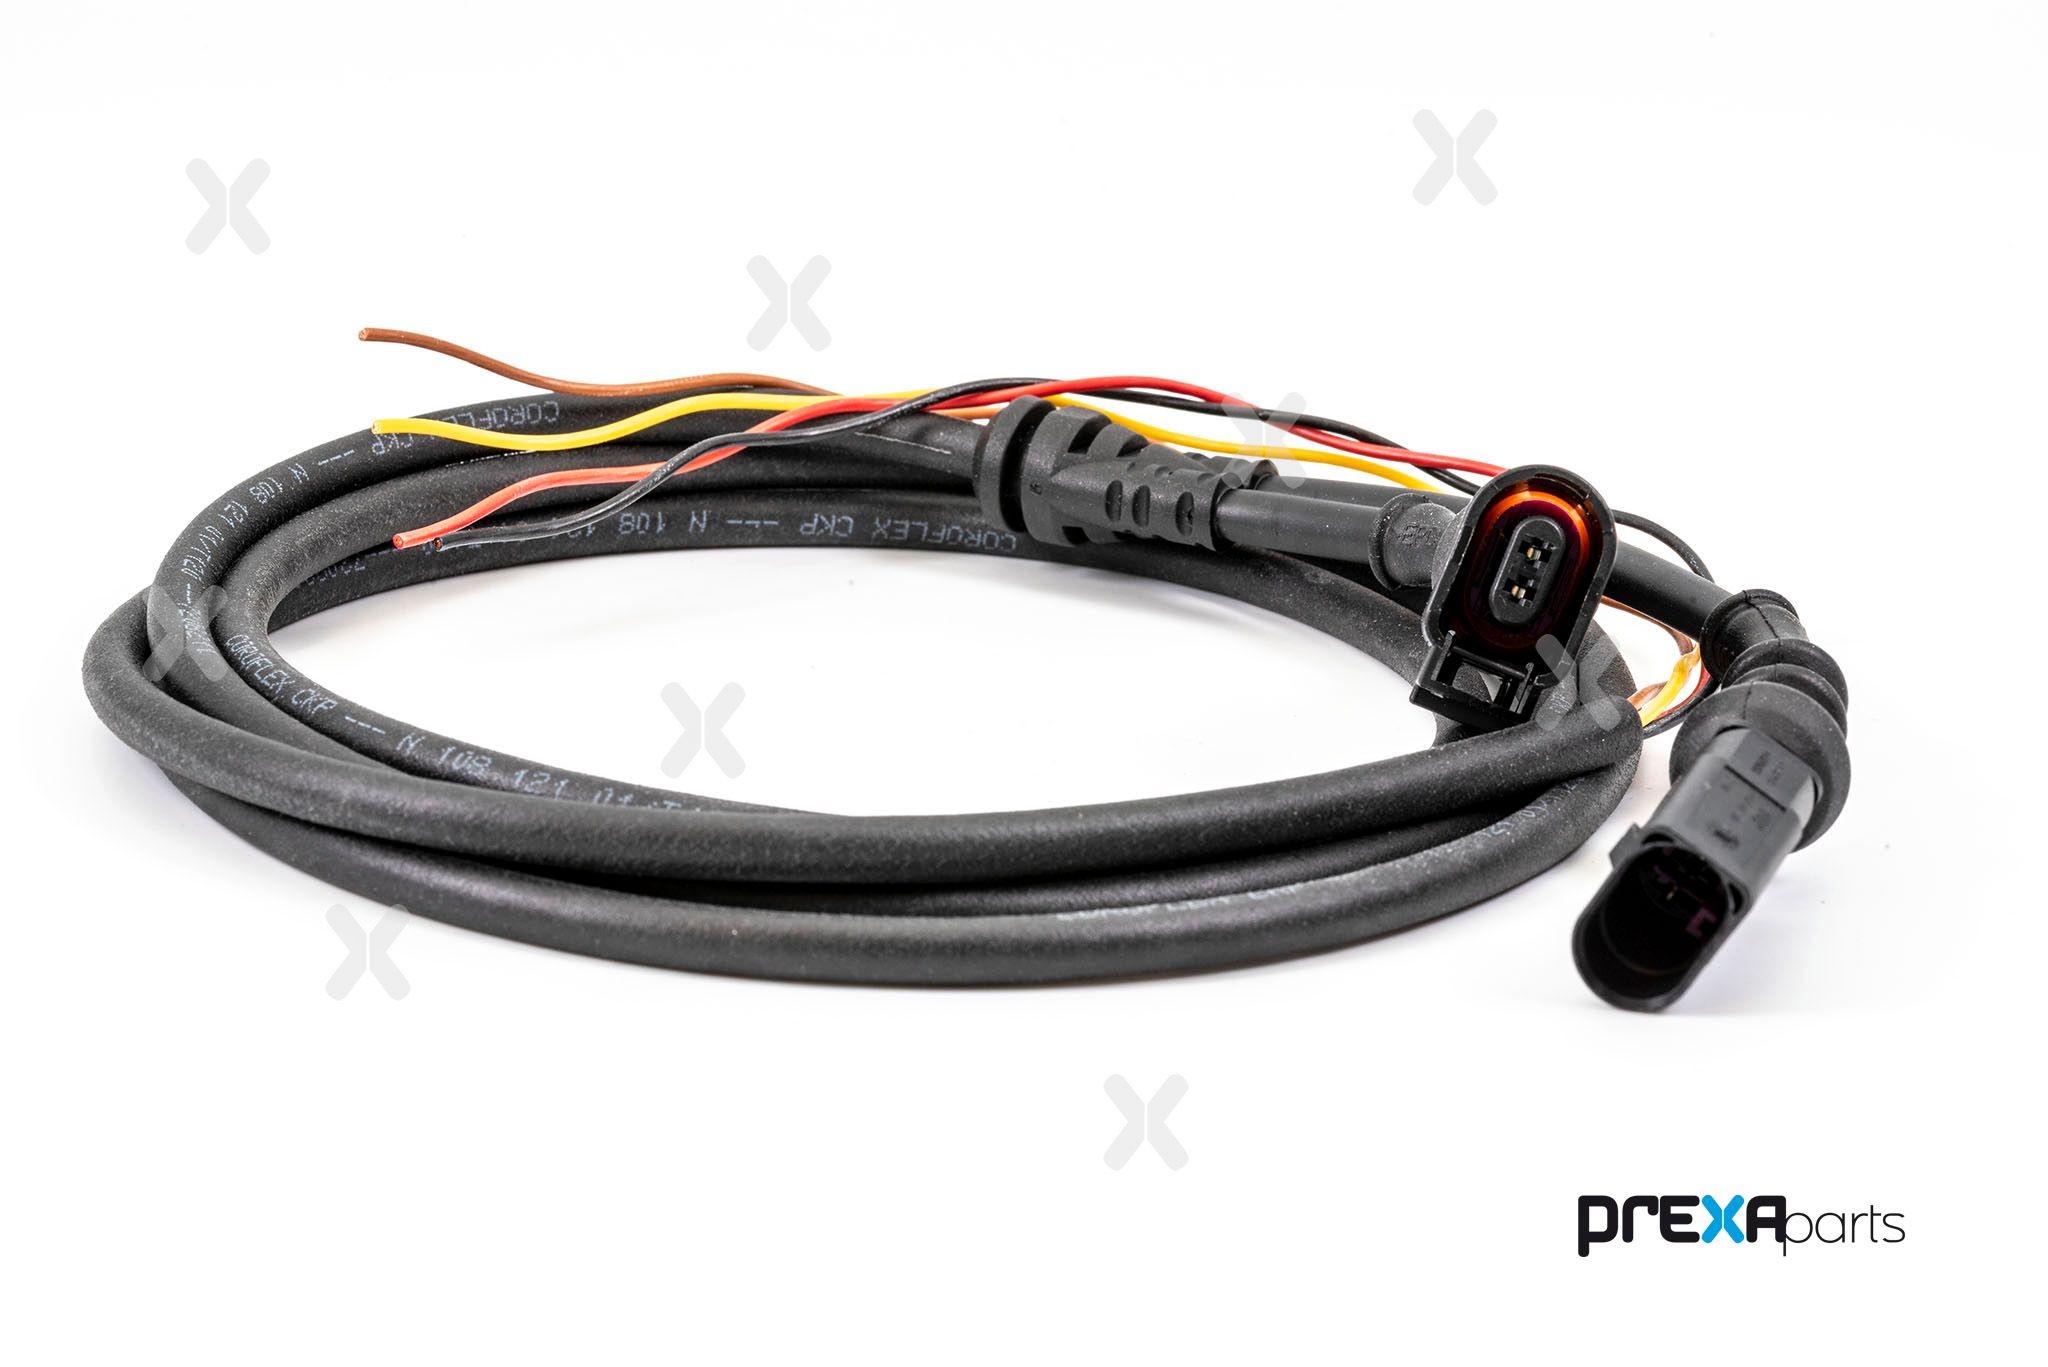 Original P143011 PREXAparts Tyre pressure monitoring system (TPMS) experience and price